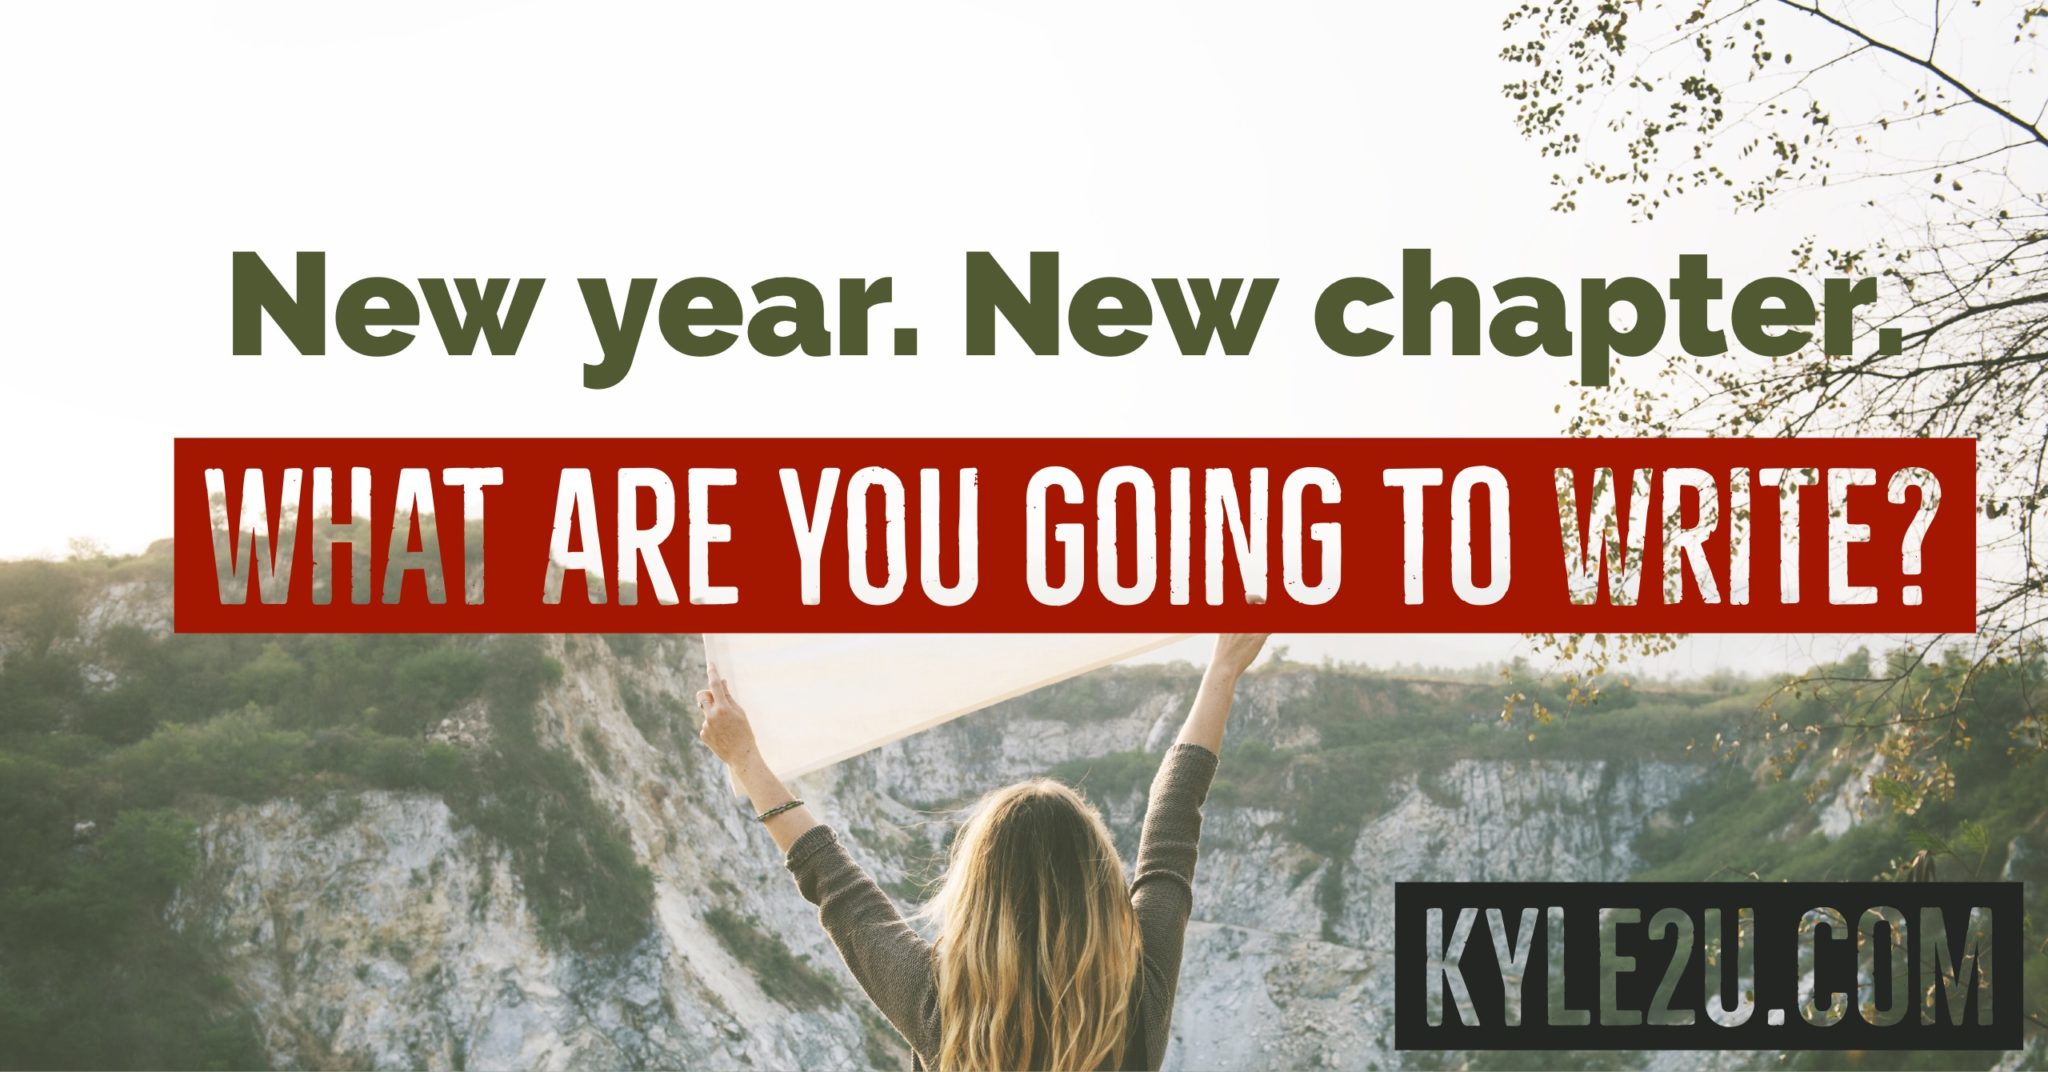 New year. New chapter. What are you going to write?